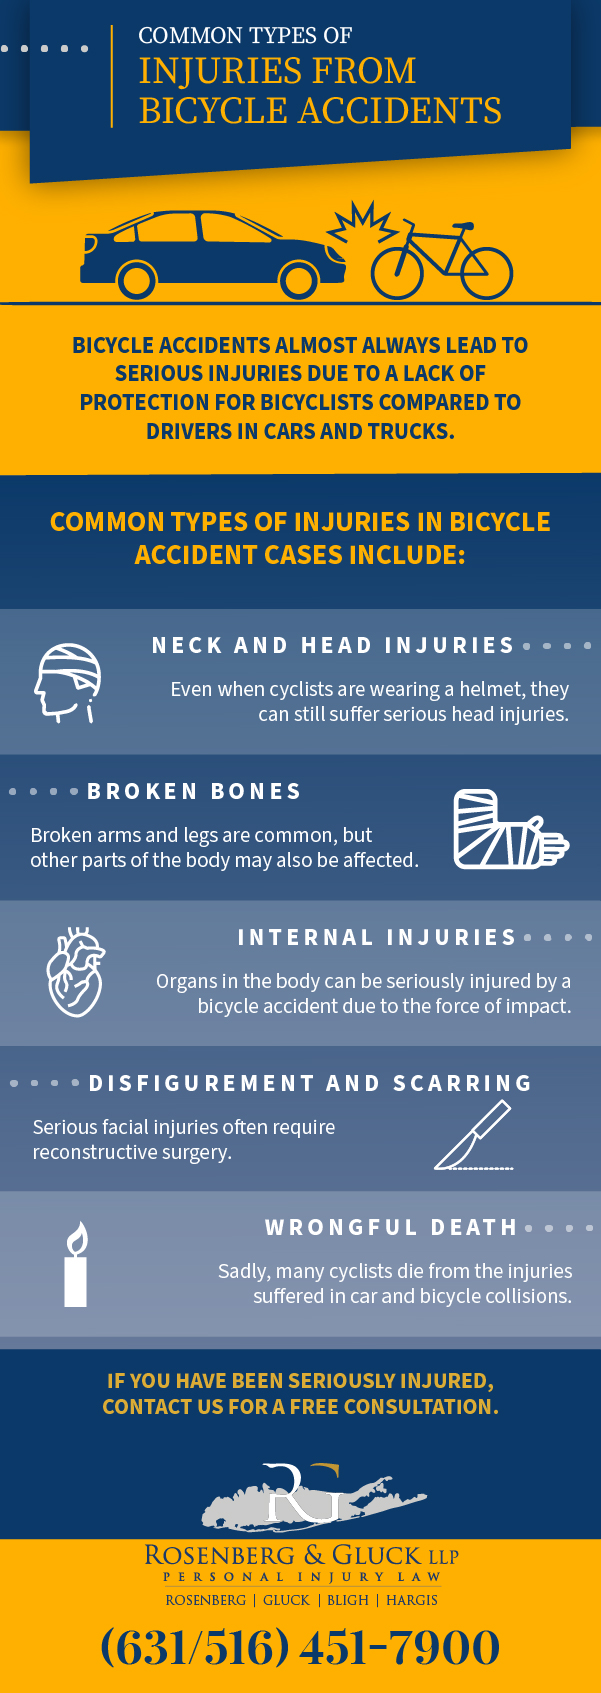 Common Types Of Injuries From Bicycle Accidents